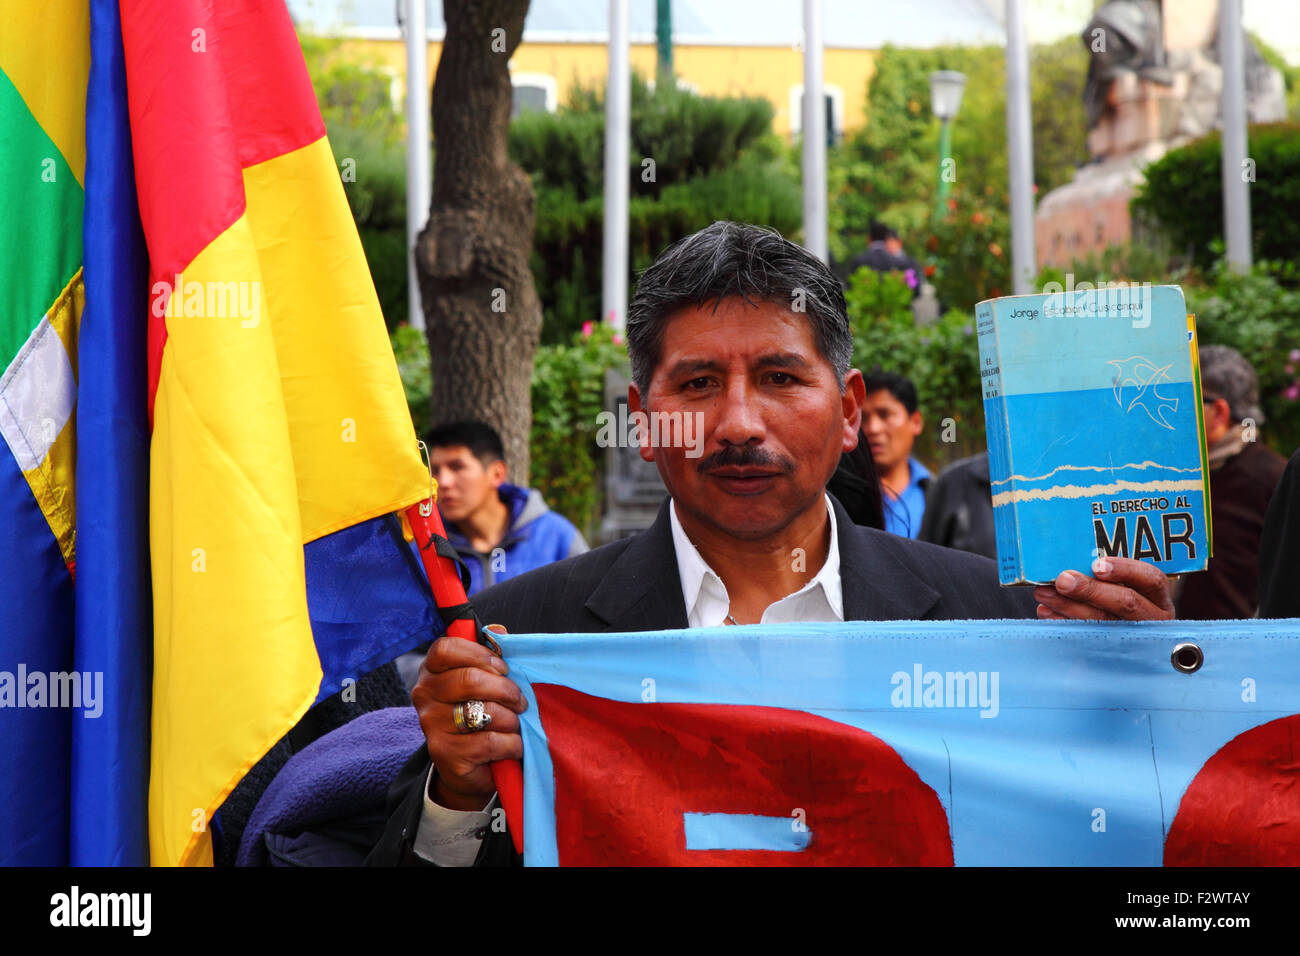 La Paz, Bolivia, 24th September 2015. A man holds a book titled 'The Right to the Sea' / 'El Derecho al Mar' by Jorge Escobari Cusicanqui while awaiting the verdict of the International Court of Justice in The Hague. Bolivia asked the ICJ in 2013 to demand that Chile negotiated access to the Pacific Ocean for Bolivia (Bolivia lost its coast to Chile during the War of the Pacific (1879-1884)). Chile raised an objection that the case wasn't within the ICJ's jurisdiction. The ICJ ruled (by 14 votes to 2) that it did have jurisdiction to hear the case. Credit:  James Brunker / Alamy Live N Stock Photo